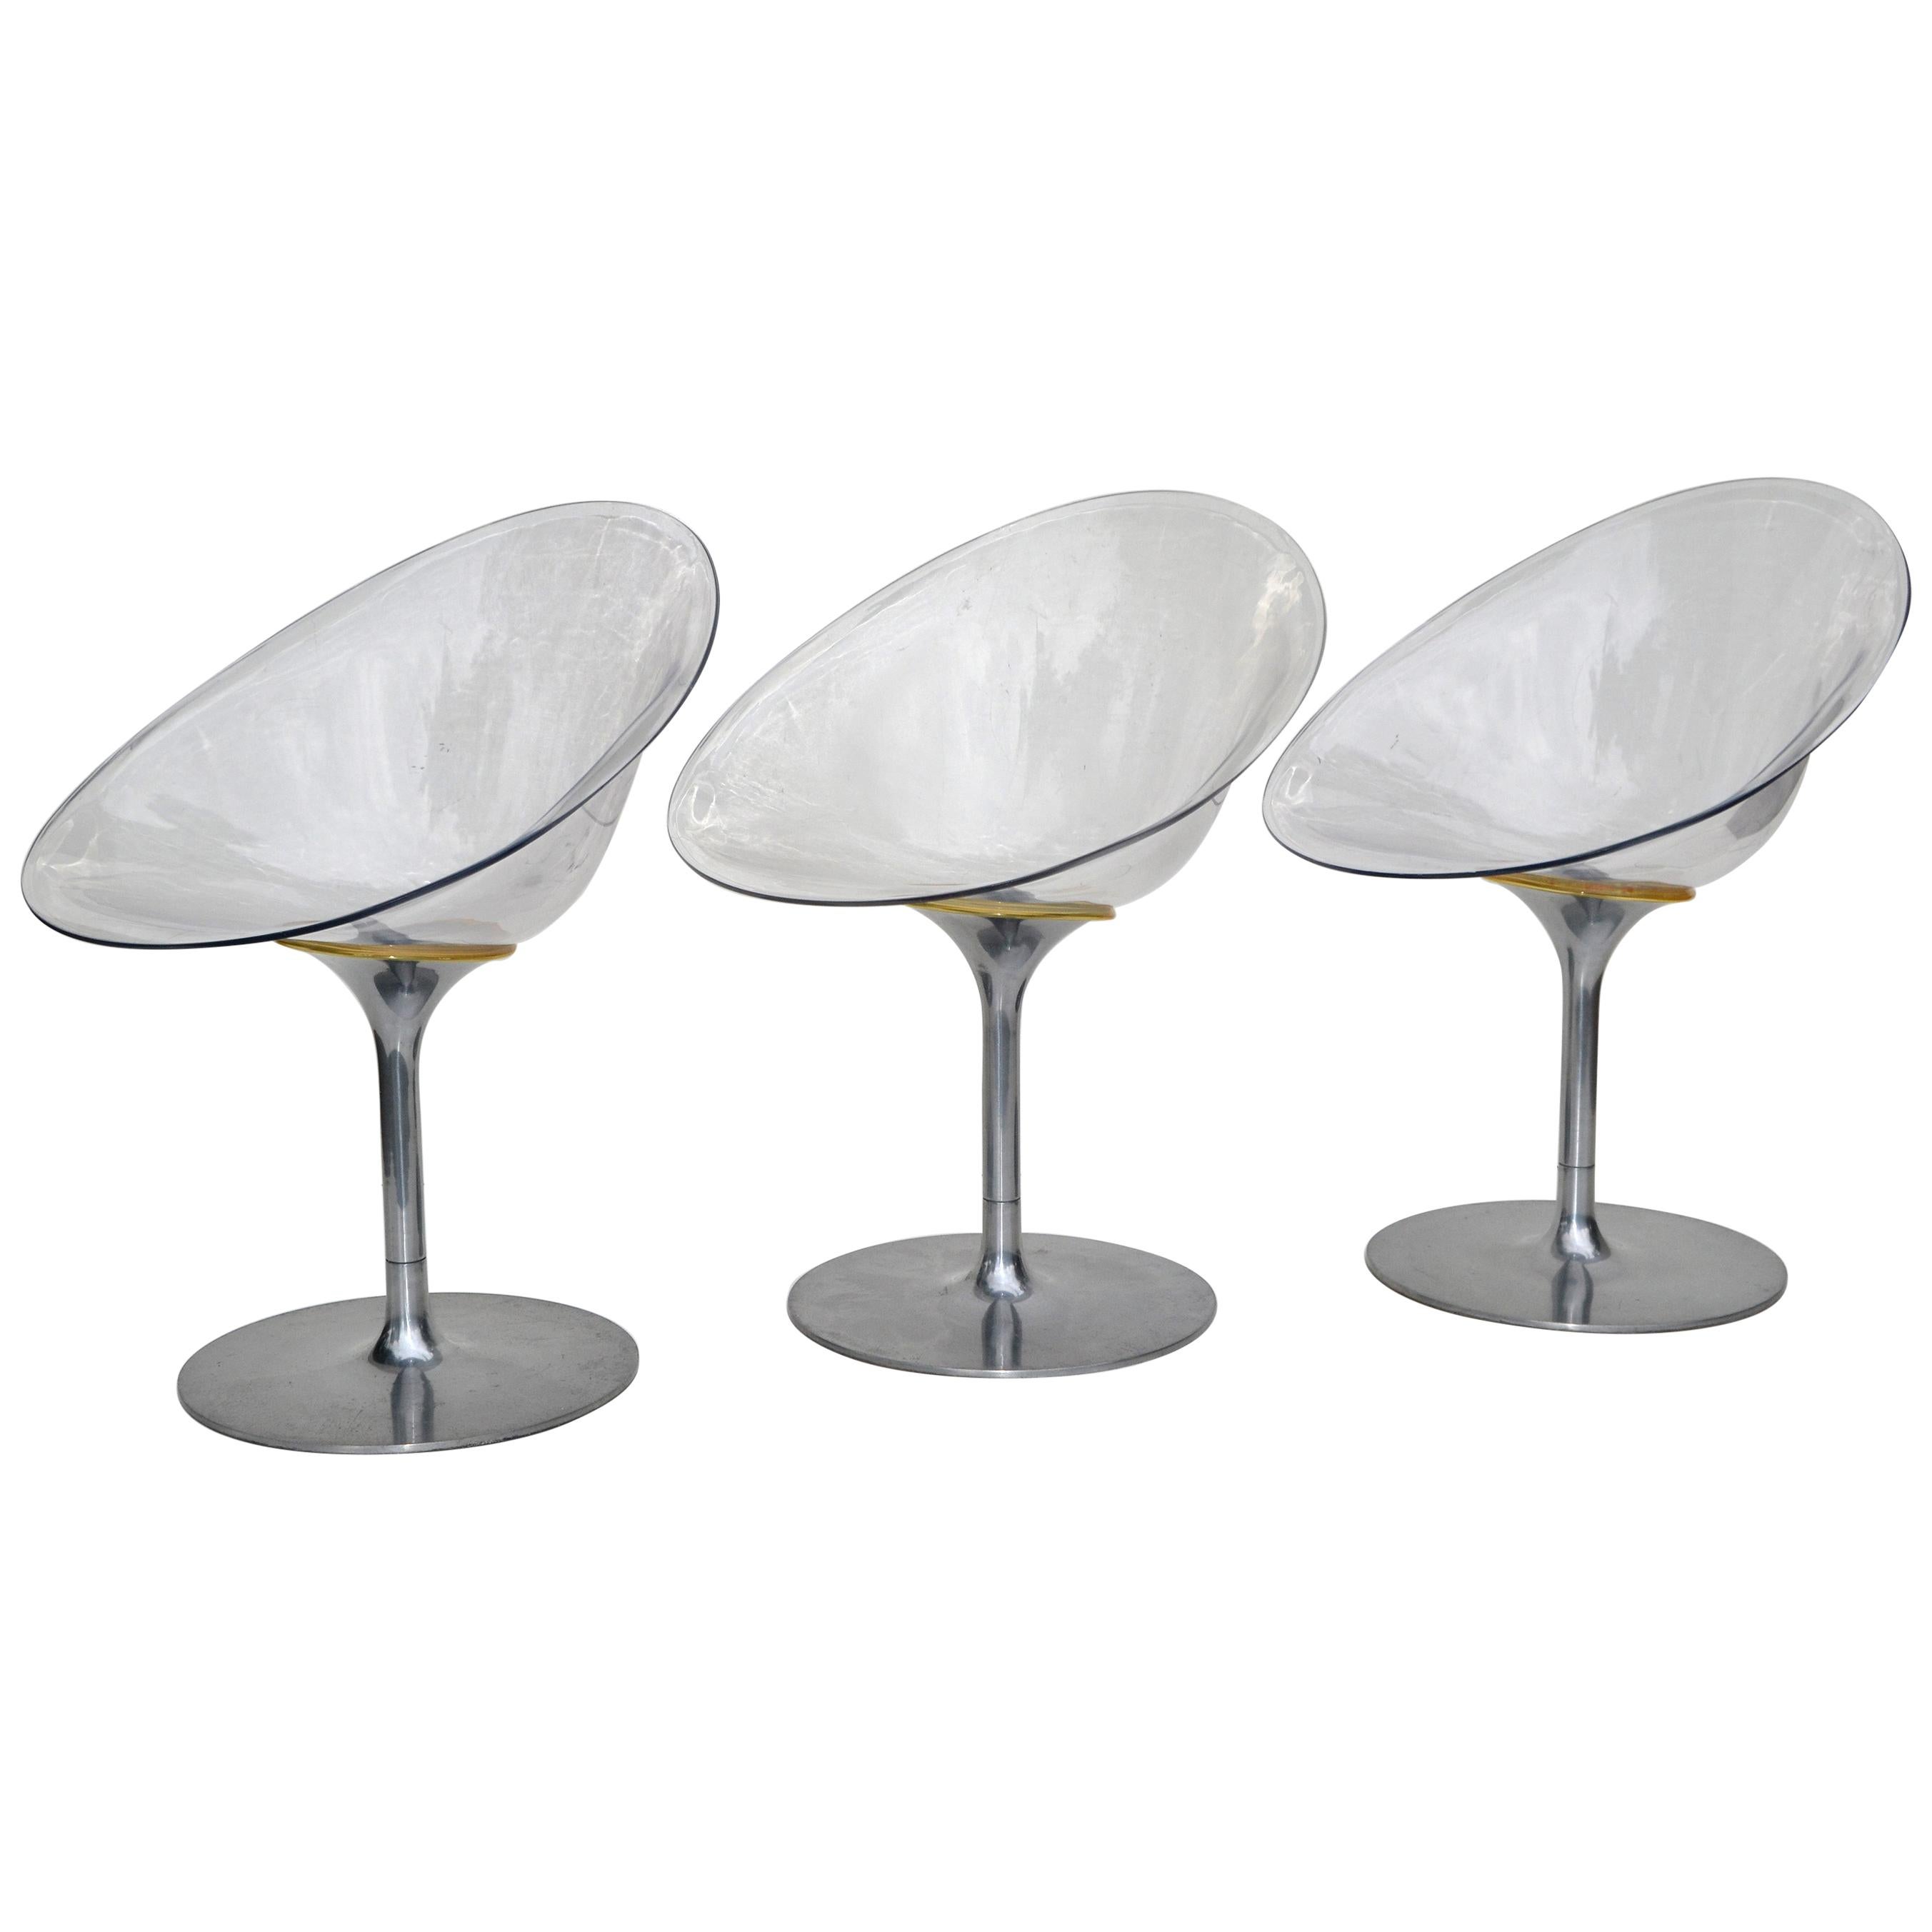 Philippe Starck for Kartell Clear Lucite Eros Swivel Italian Chairs, Set of 3 For Sale